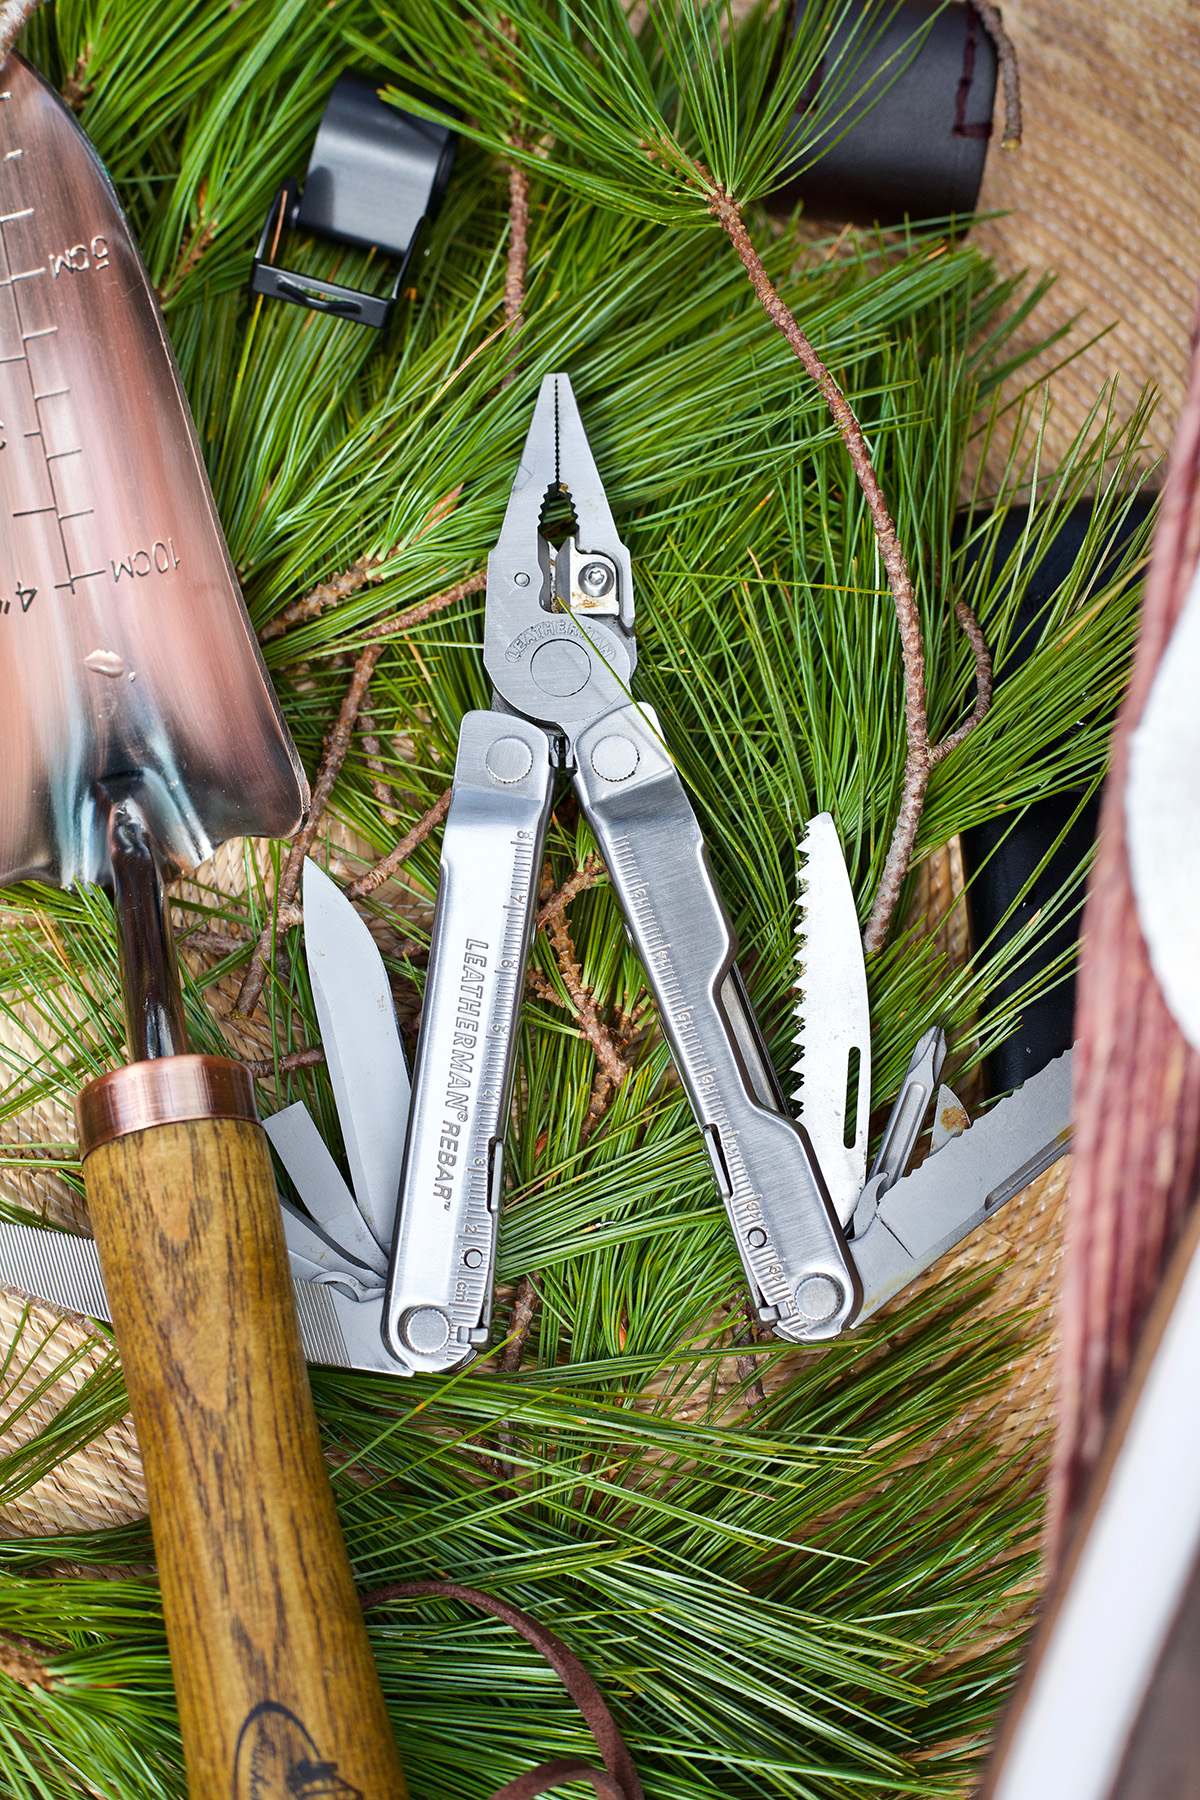 7 Essential Tools For Botany (And A Few More For Good Measure!) | Herbal Academy | Interested in studying plants and foraging? Here are some essential tools for botany to help you get started.